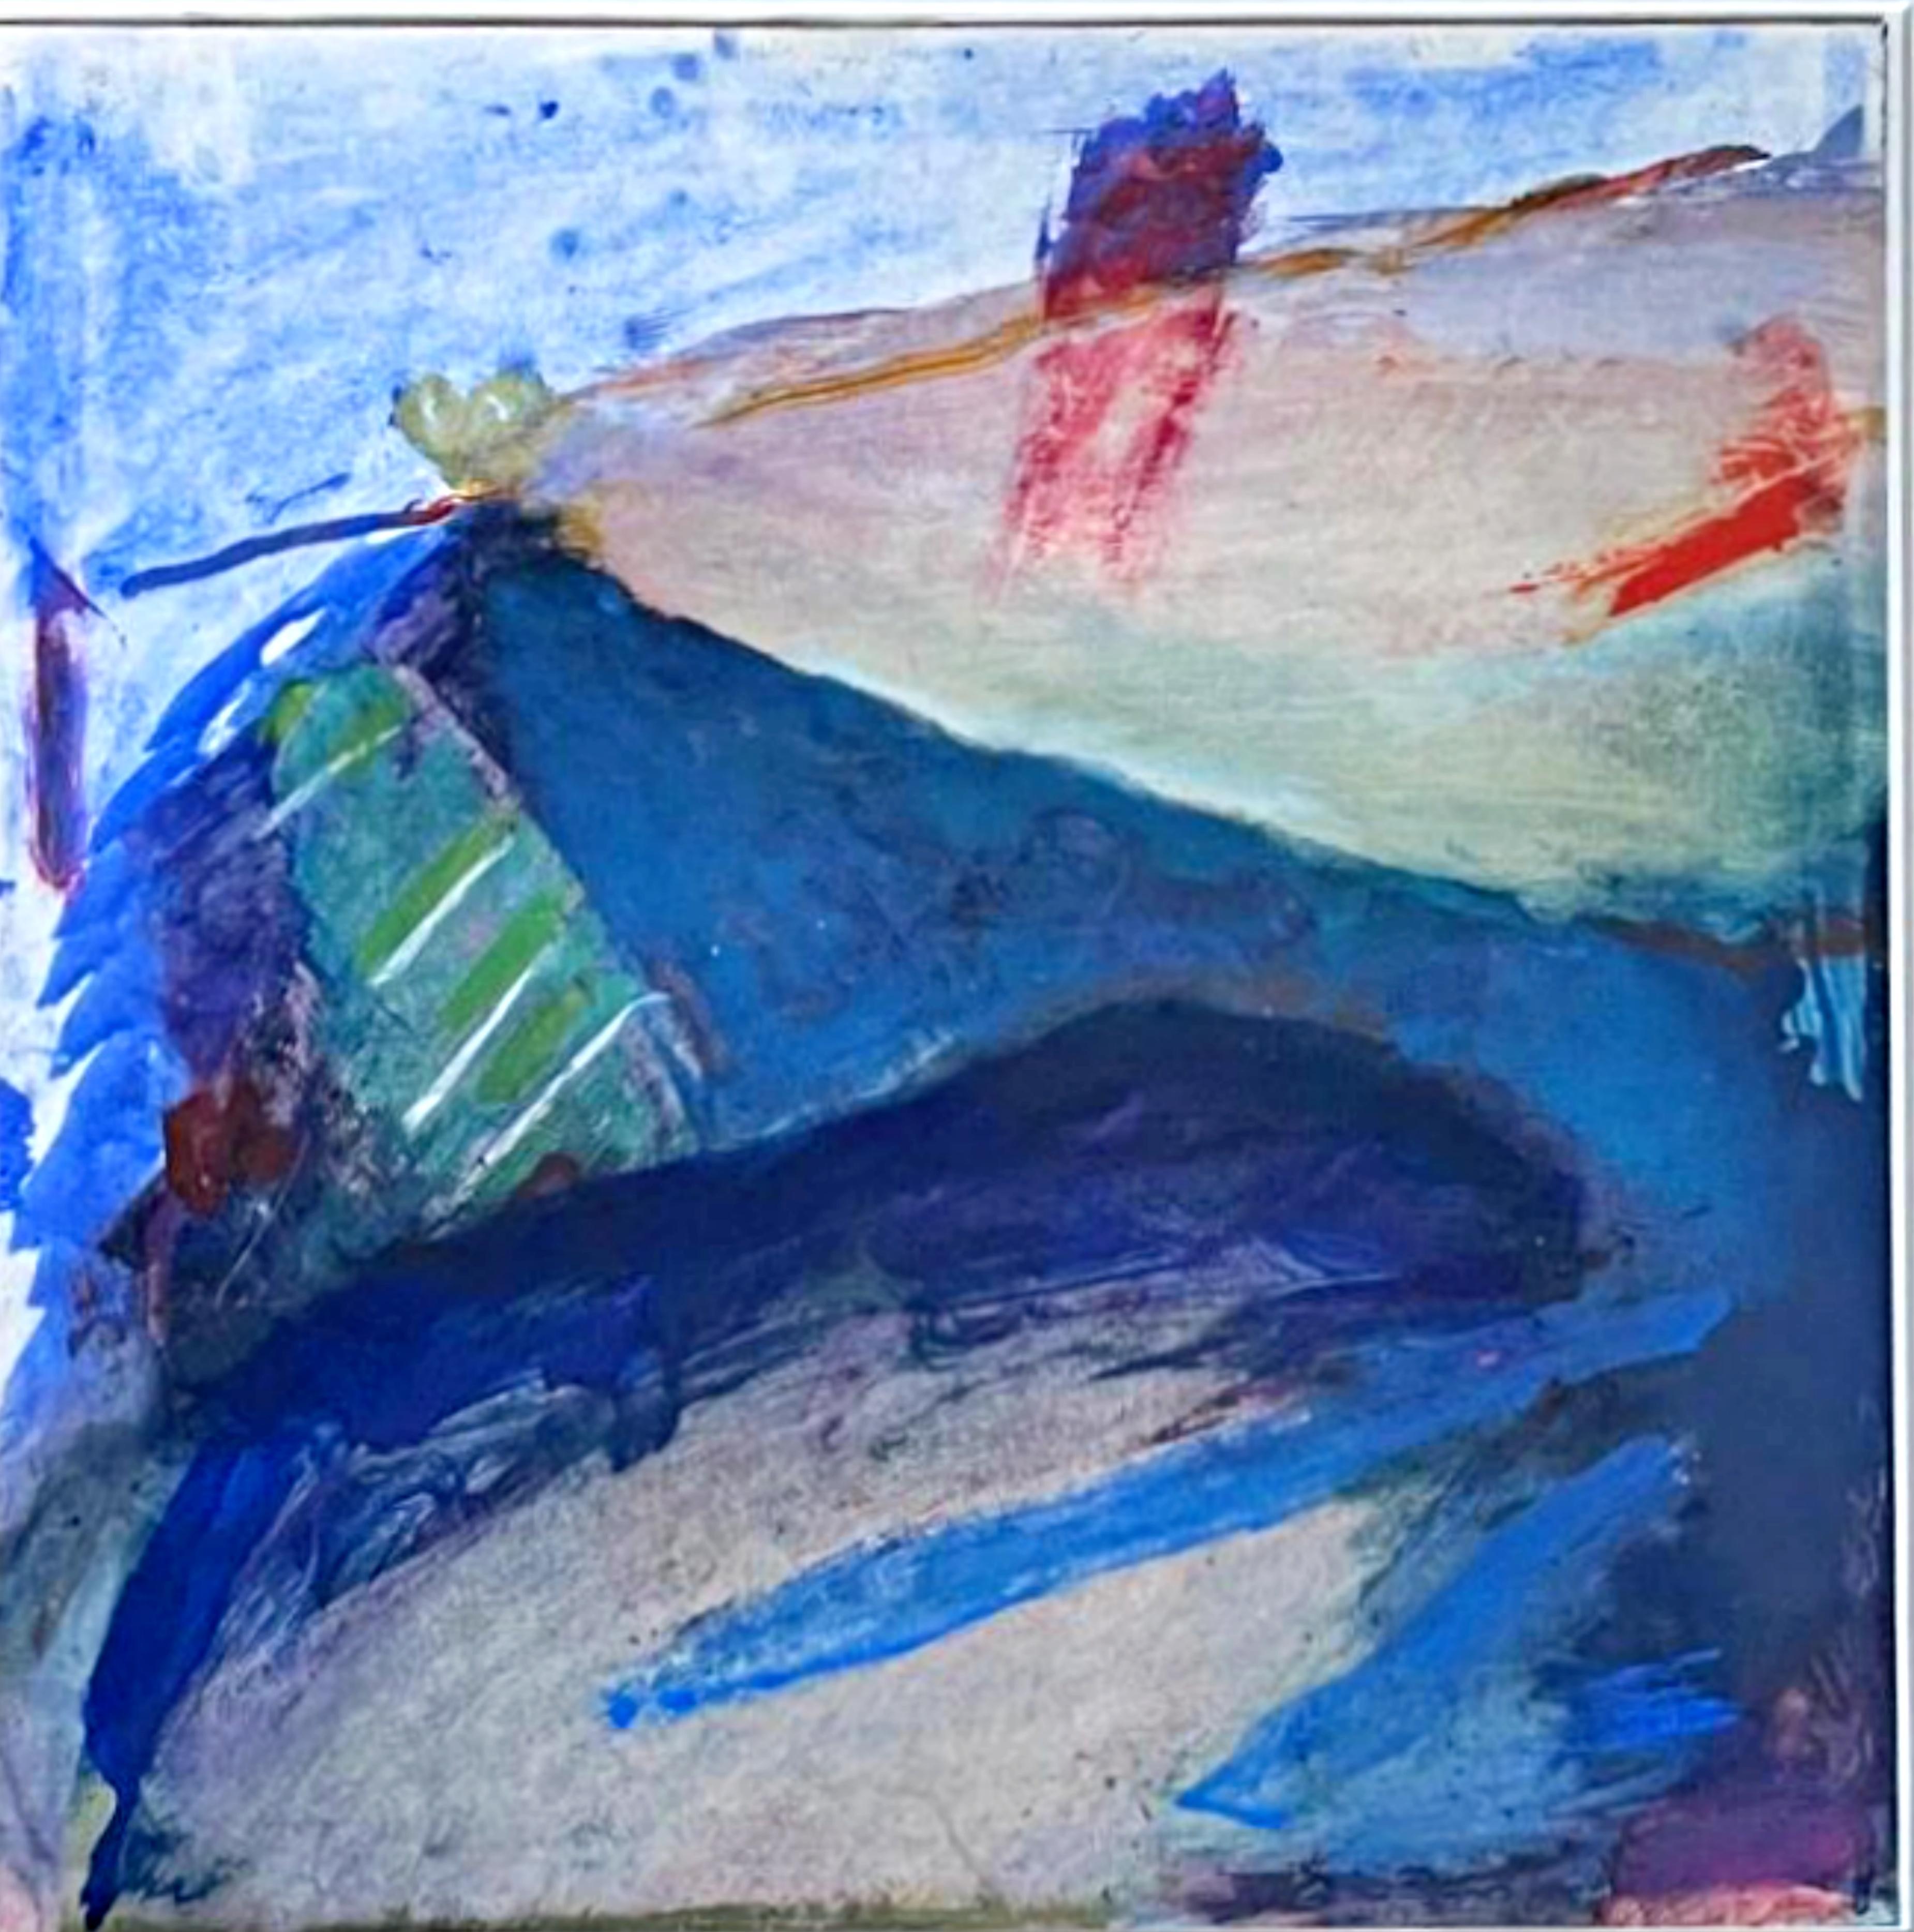 Aground (unique oil on paper painting by renowned female abstract expressionist)